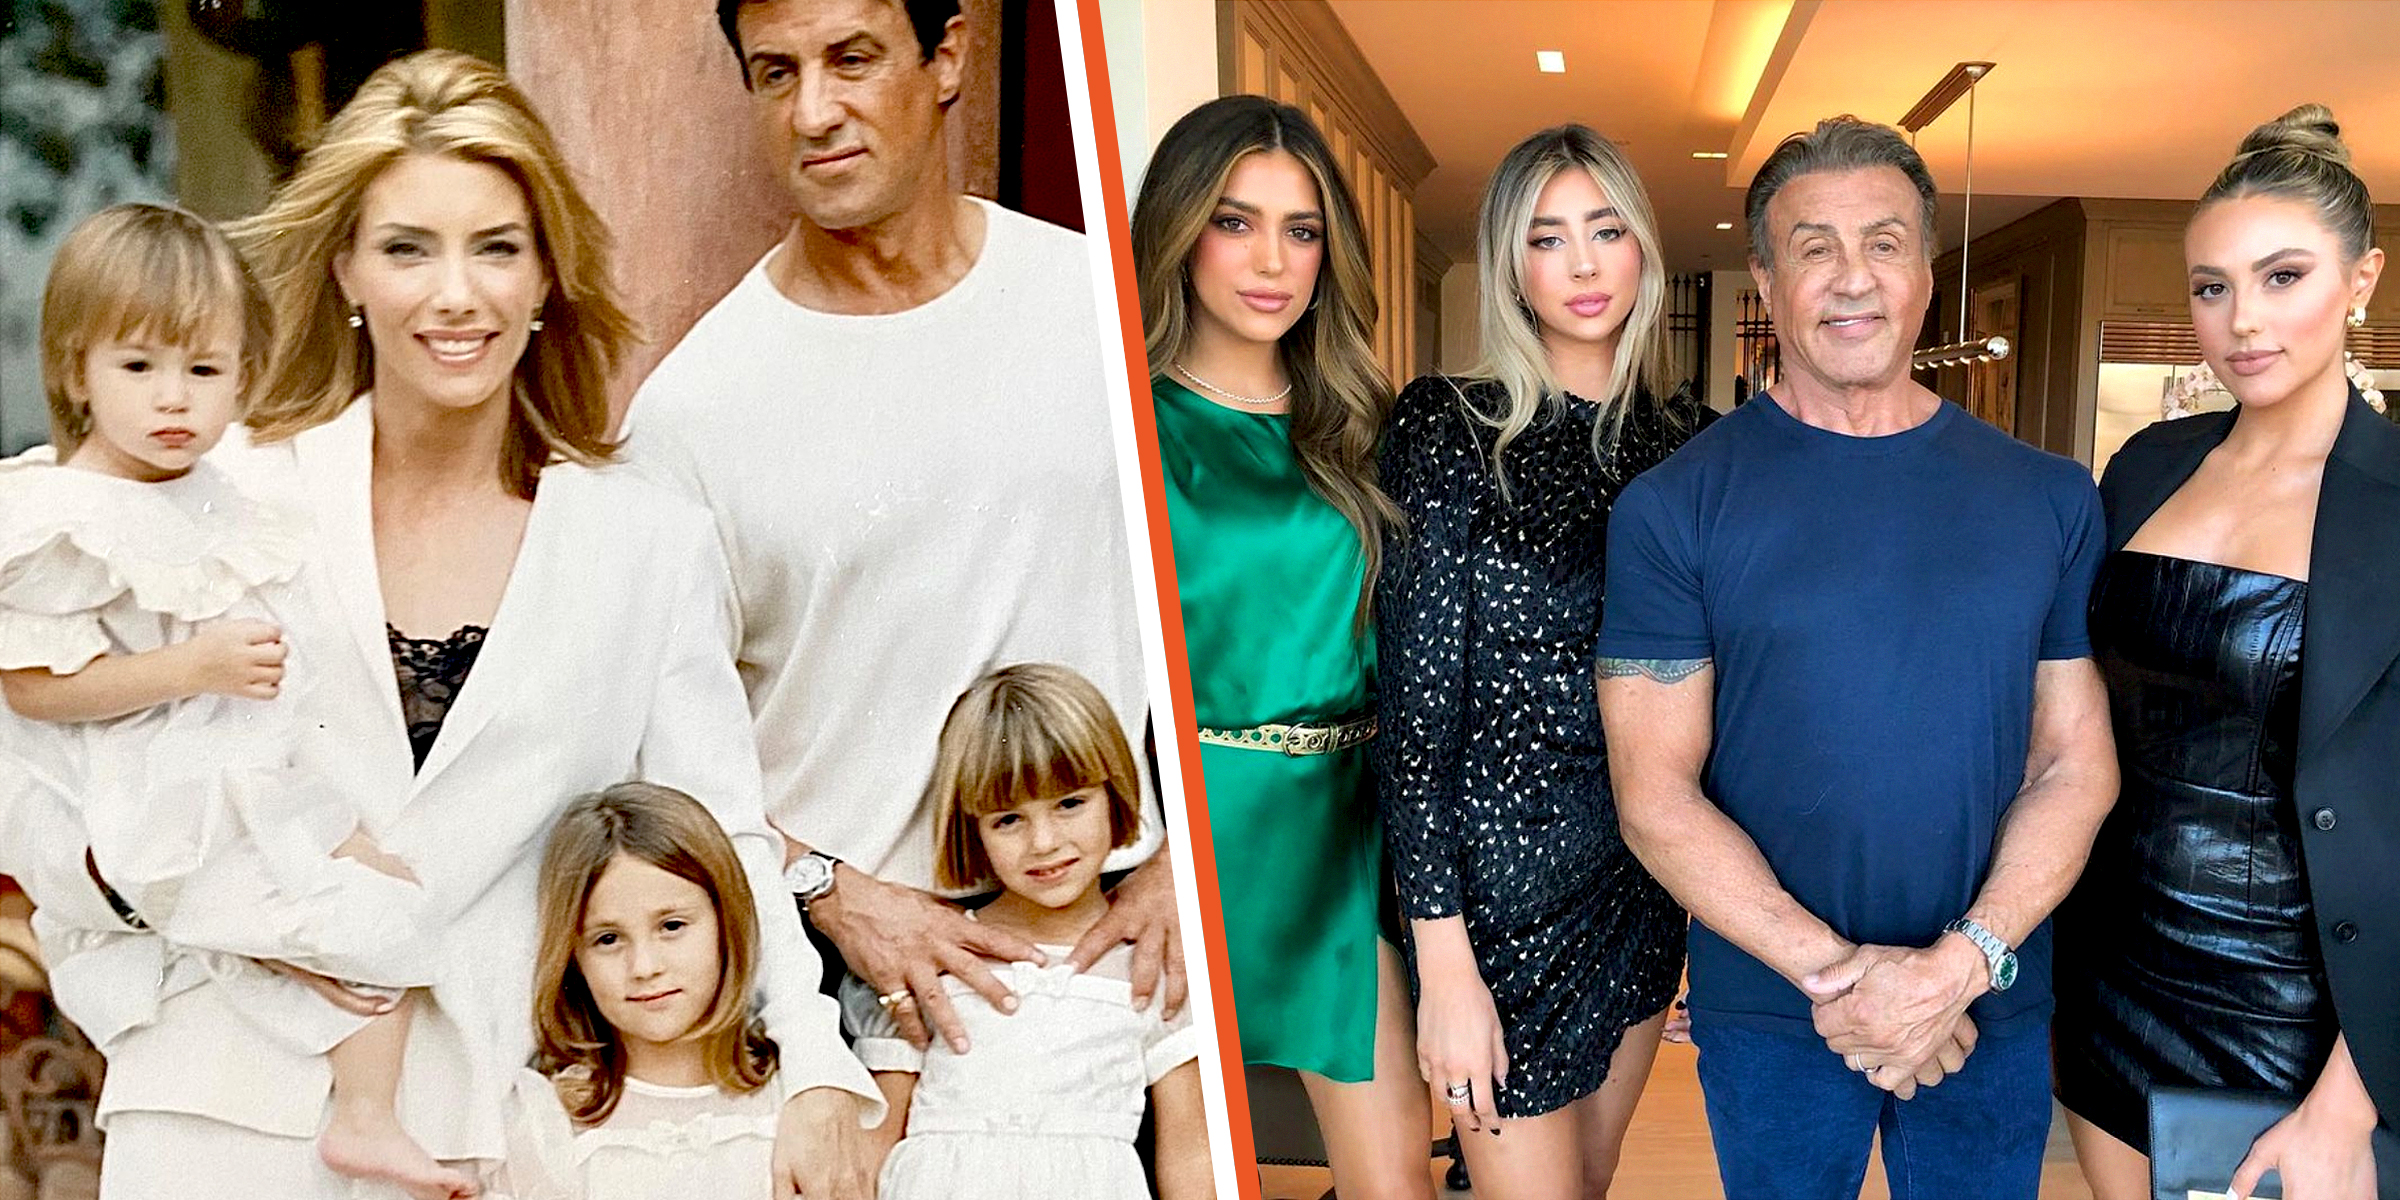 Jennifer Flavin, Sylvester Stallone, and their daughters | Sylvester Stallone, Sophia Stallone, Sistine Stallone, and Scarlet Stallone | Source: Instagram.com/officialslystallone